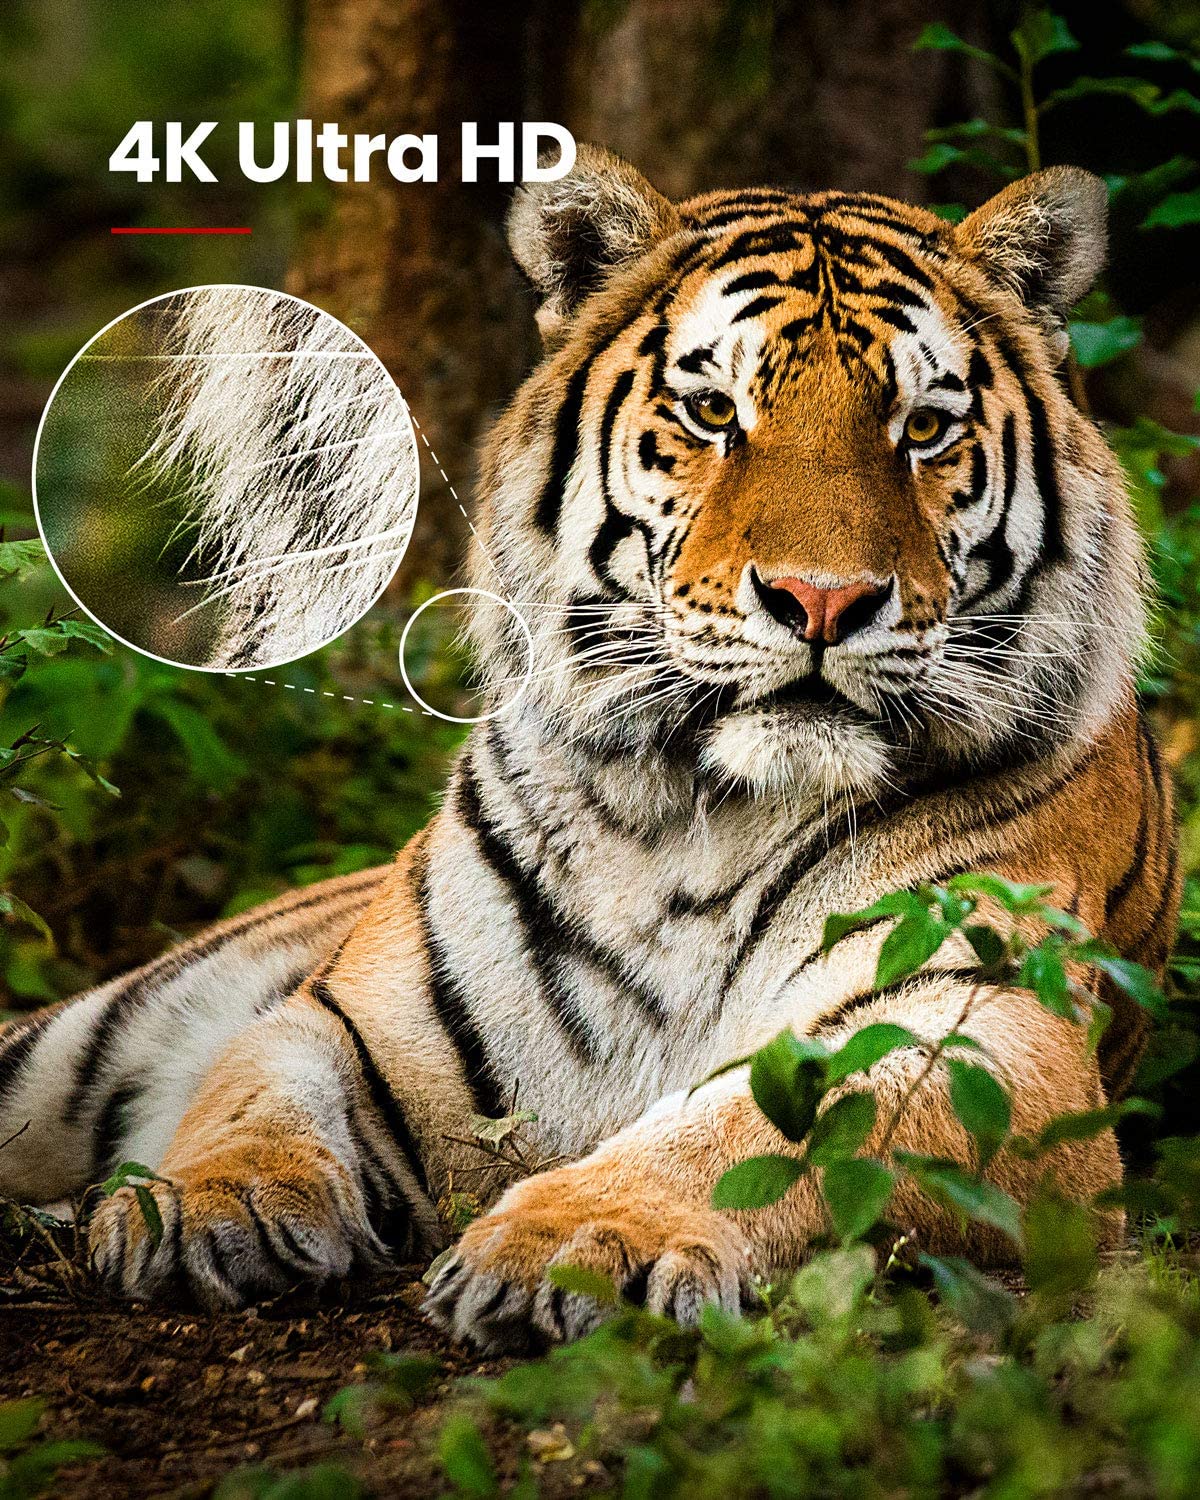 See tigers in 4K Ultra HD with Nebula Cosmos Max.